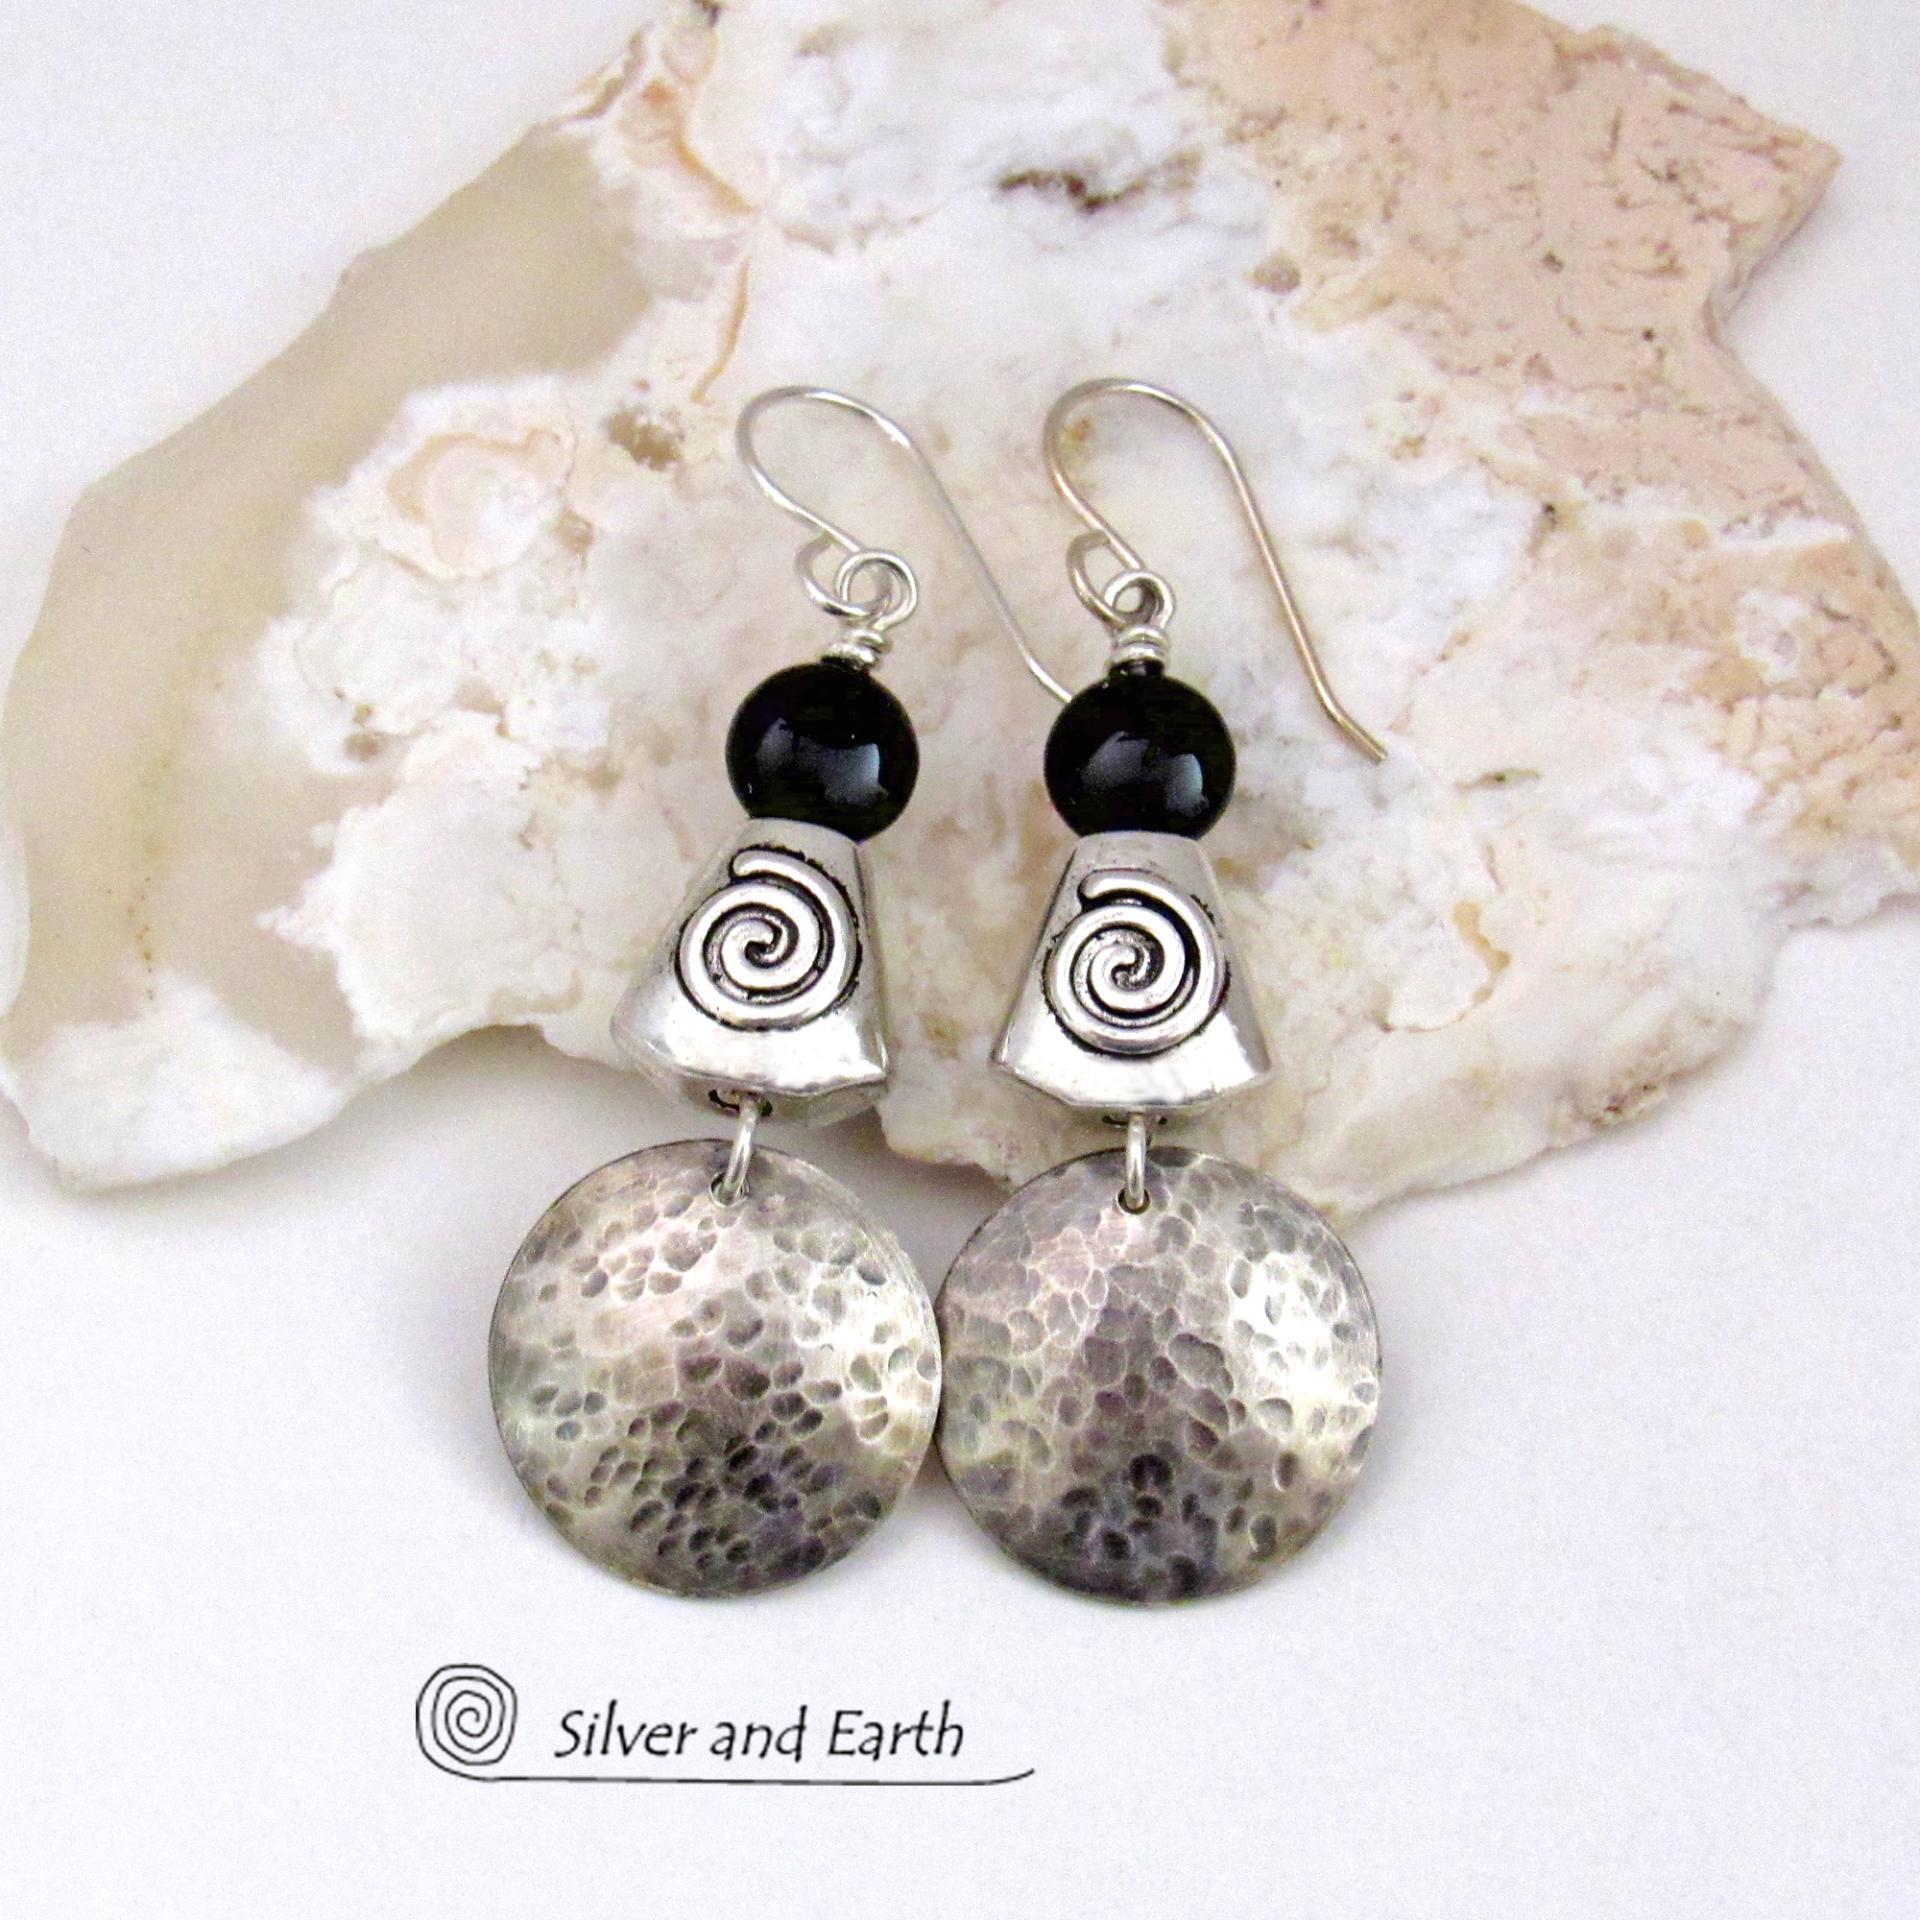 Hammered Sterling Silver Earrings with Spiral Beads & Black Onyx Stones